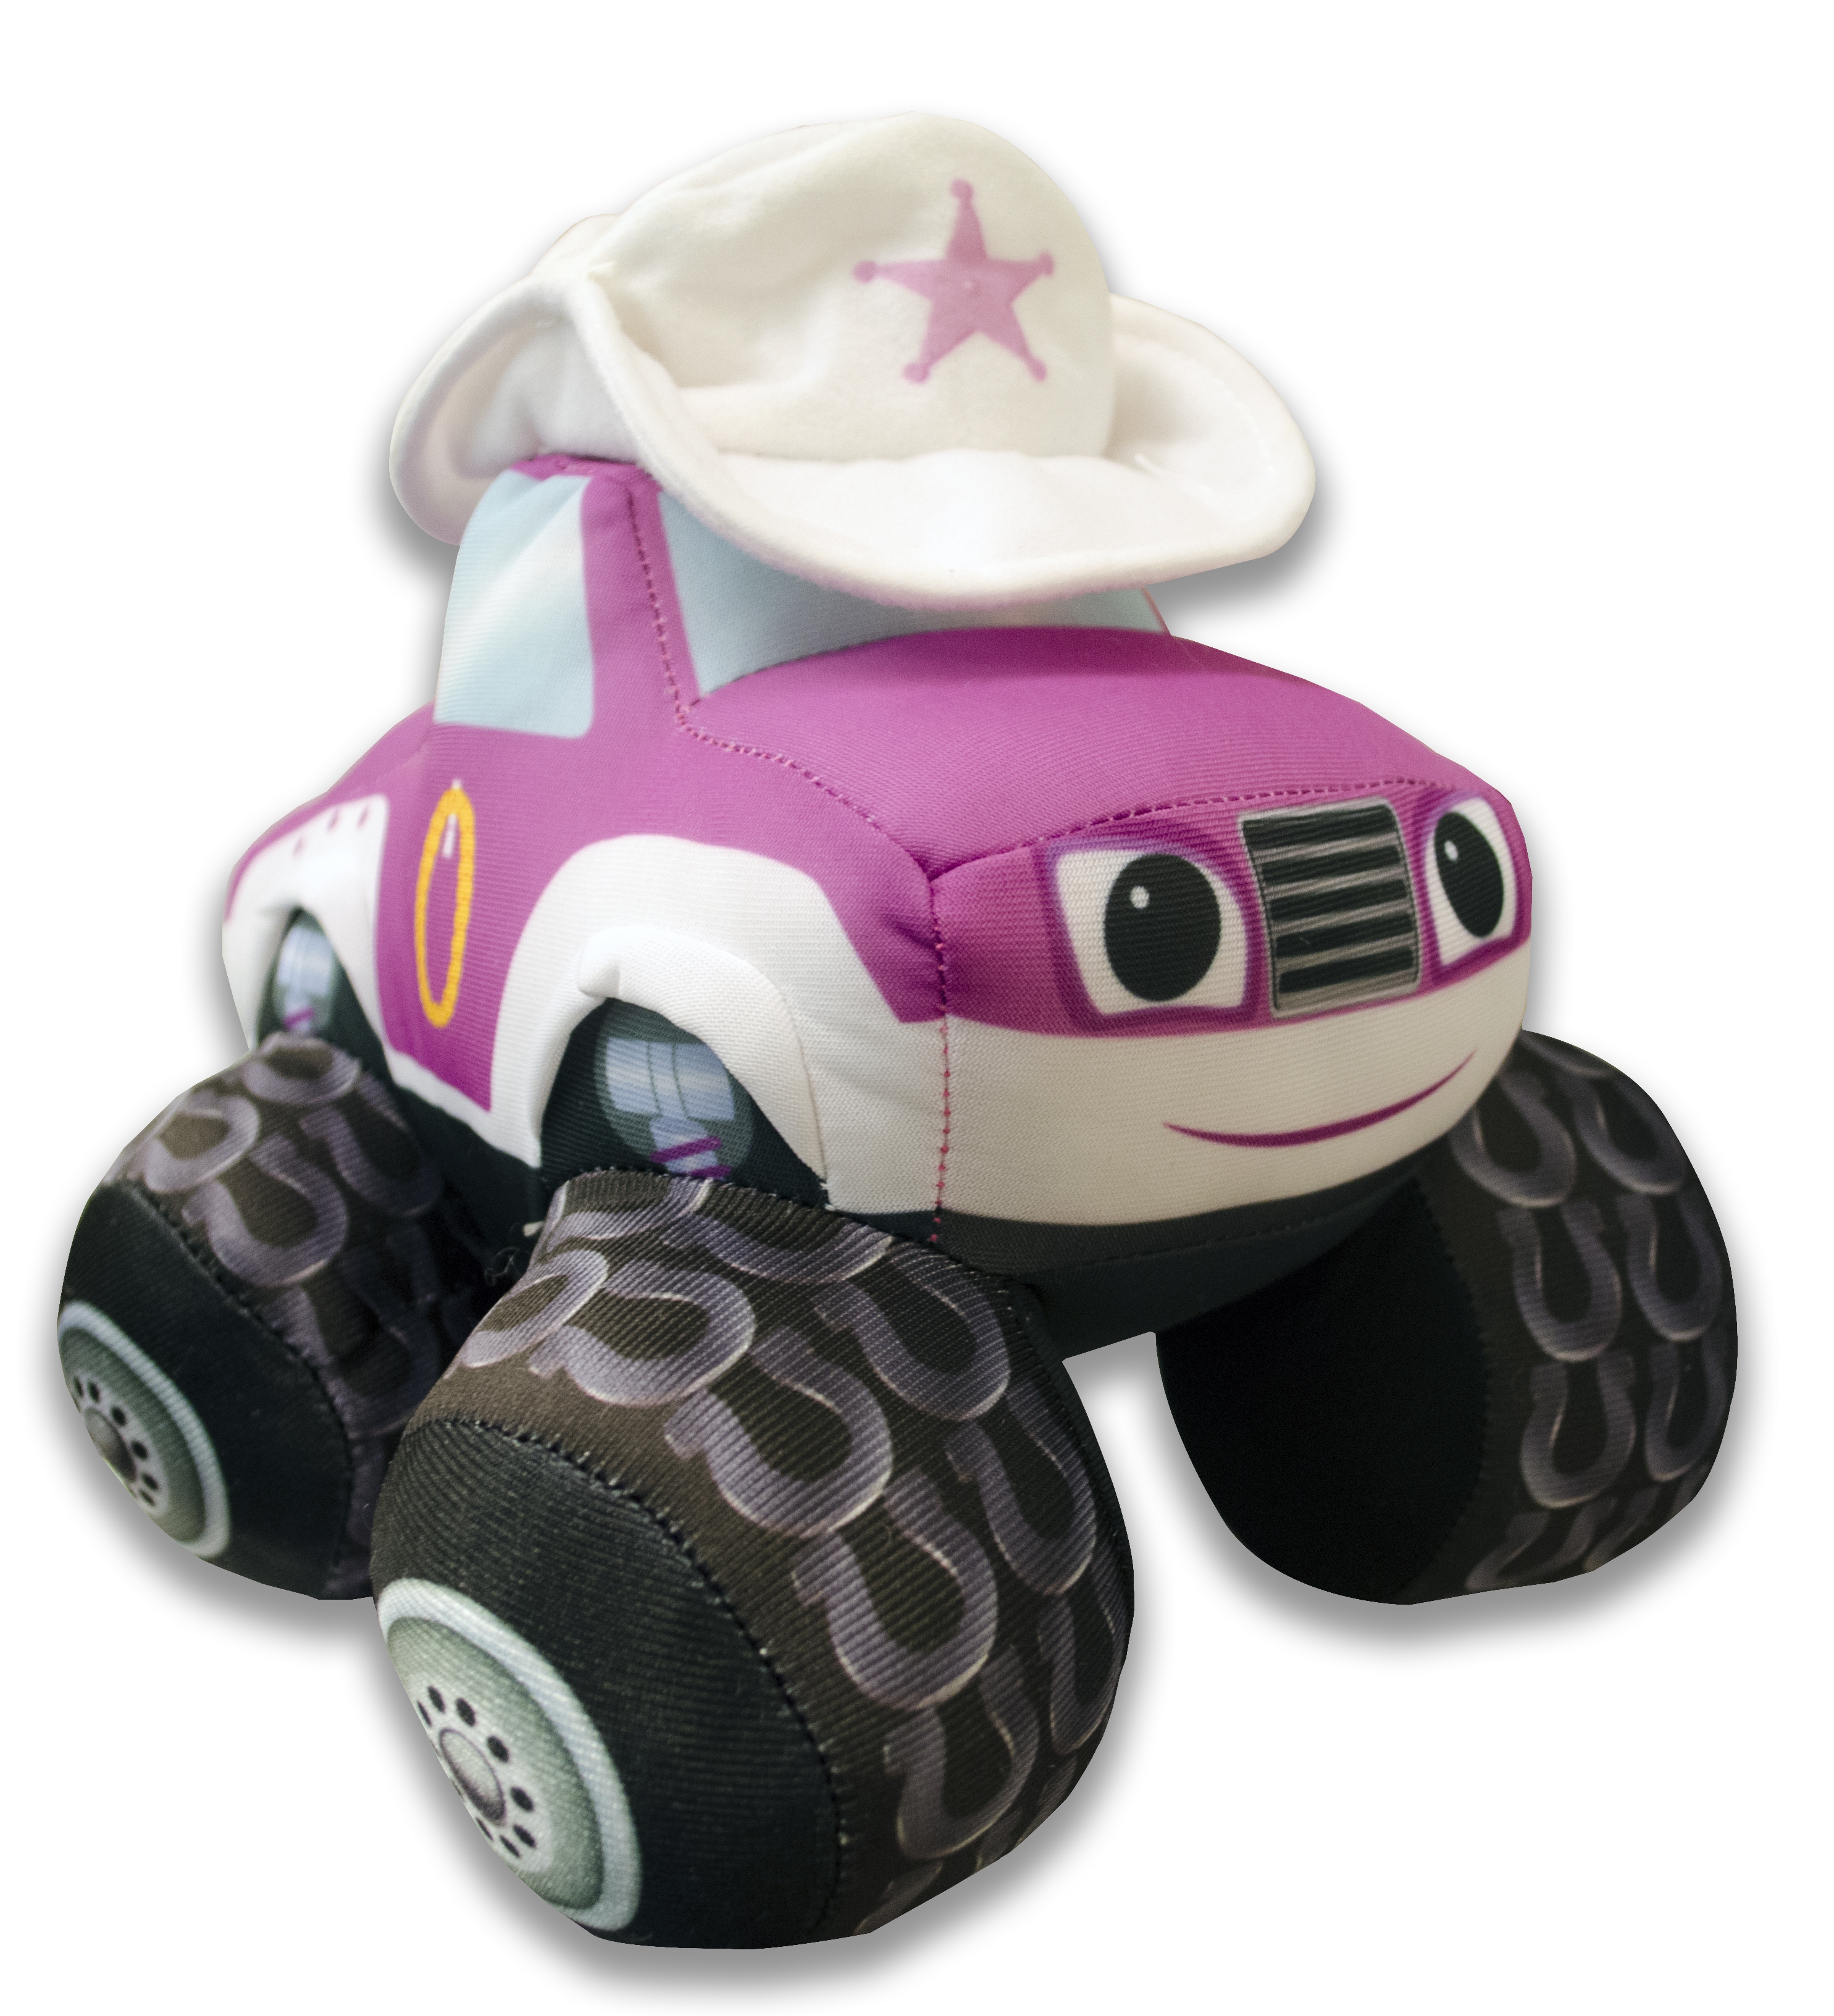 blaze and the monster machines soft toy